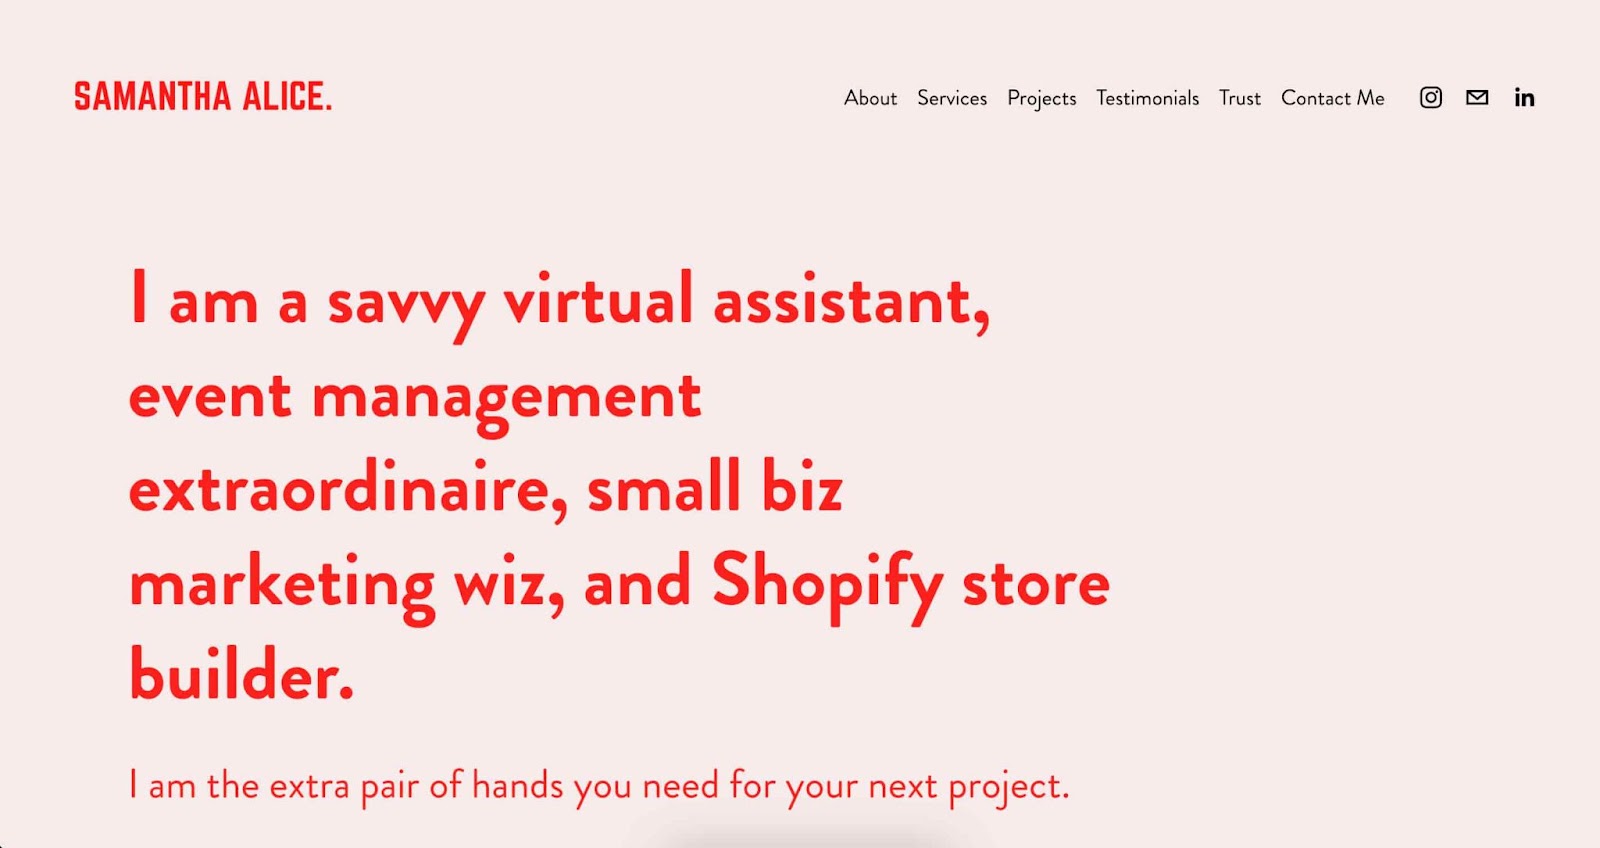 samantha alice virtual assistant website example for event management and small business marketing